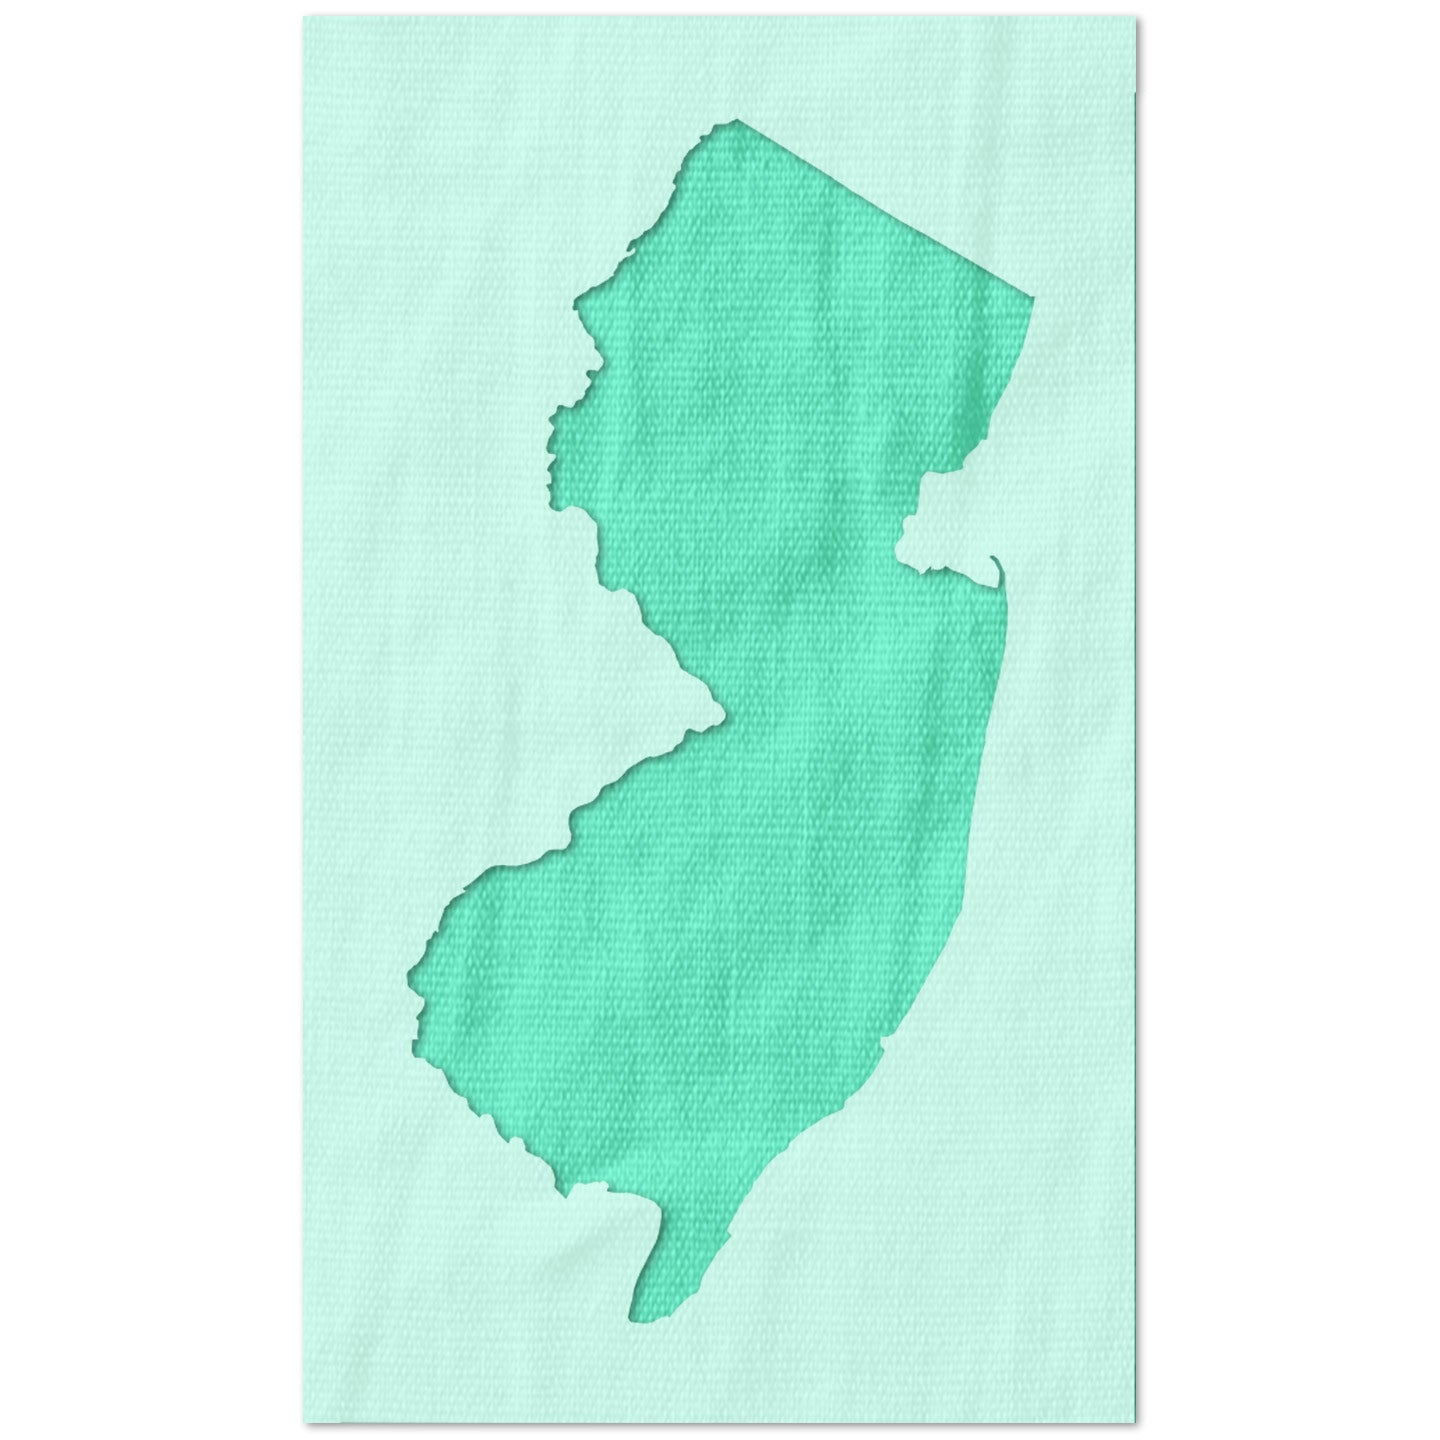 New Jersey State Outline Stencil